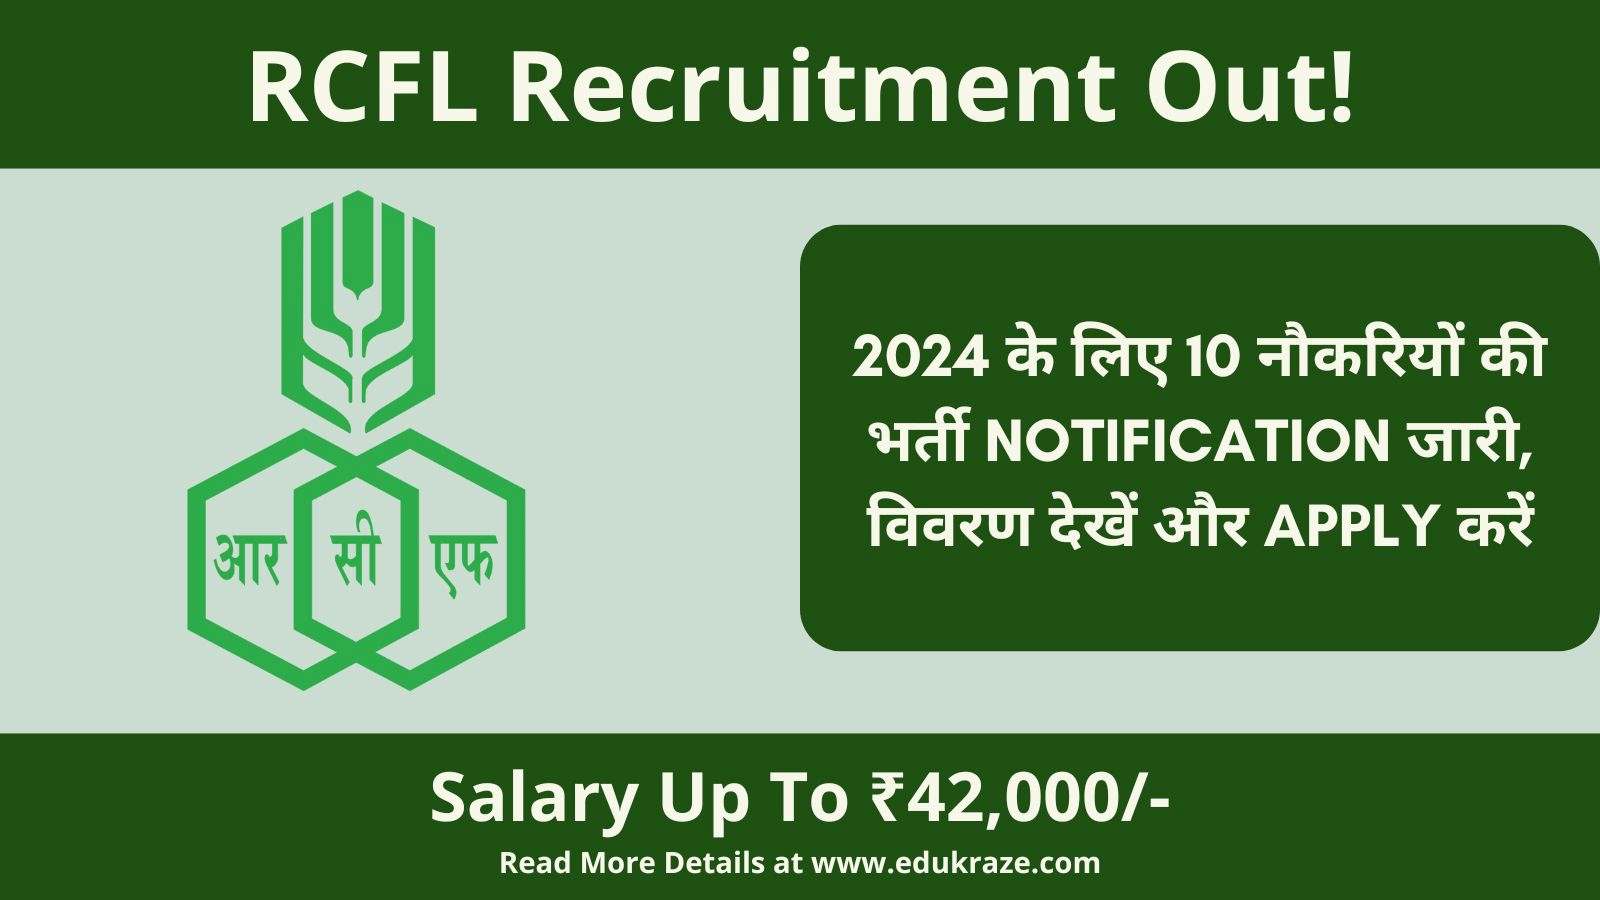 RCFL Recruitment Out for 2024, Check details and Notification here!